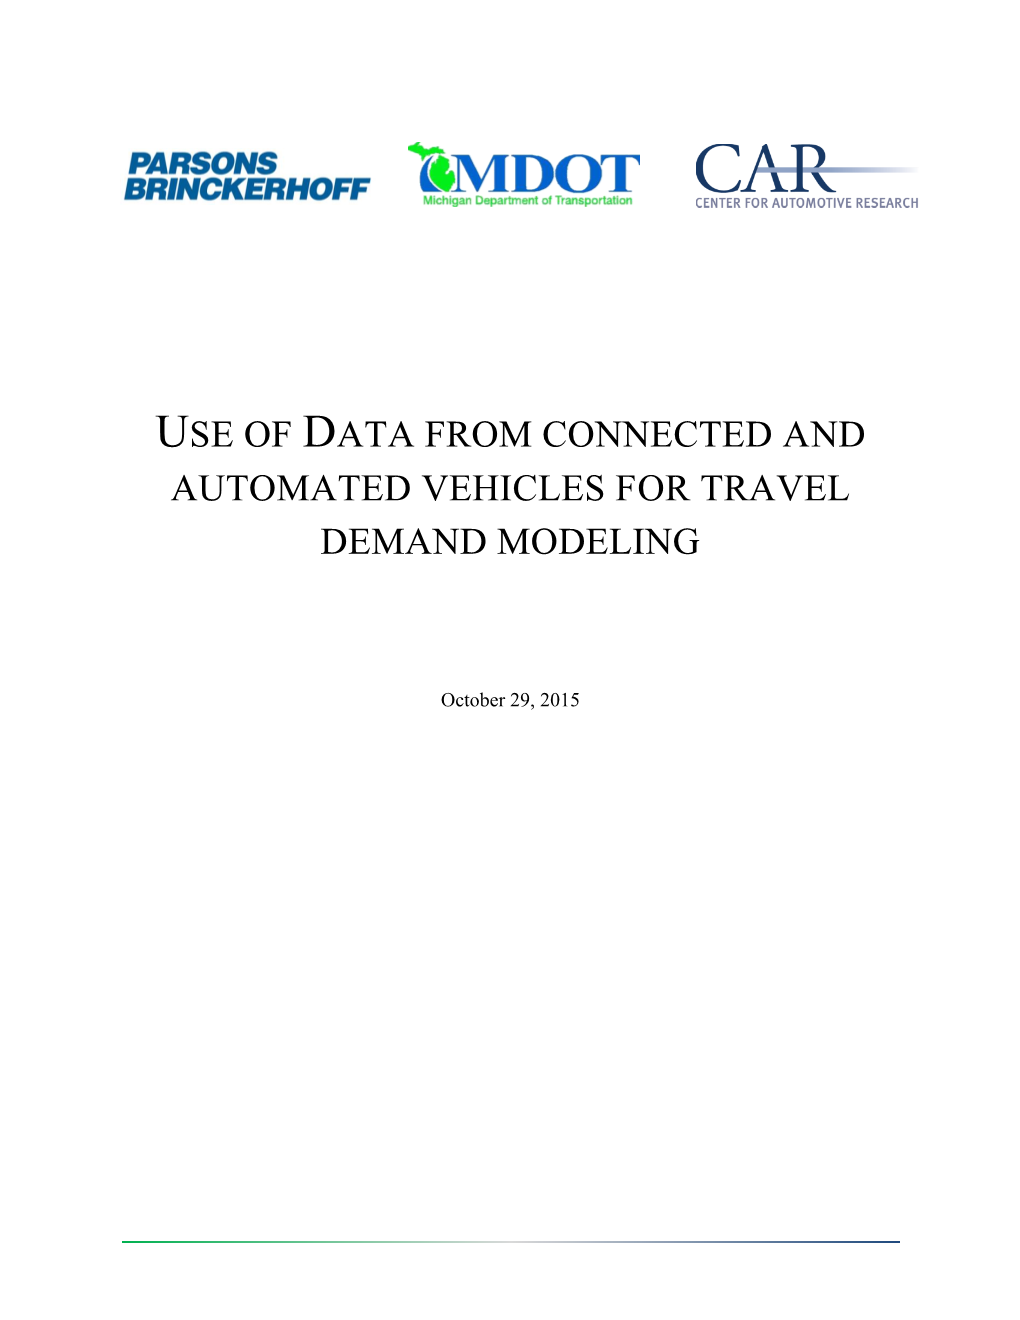 Use of Data from Connected and Automated Vehicles for Travel Demand Modeling